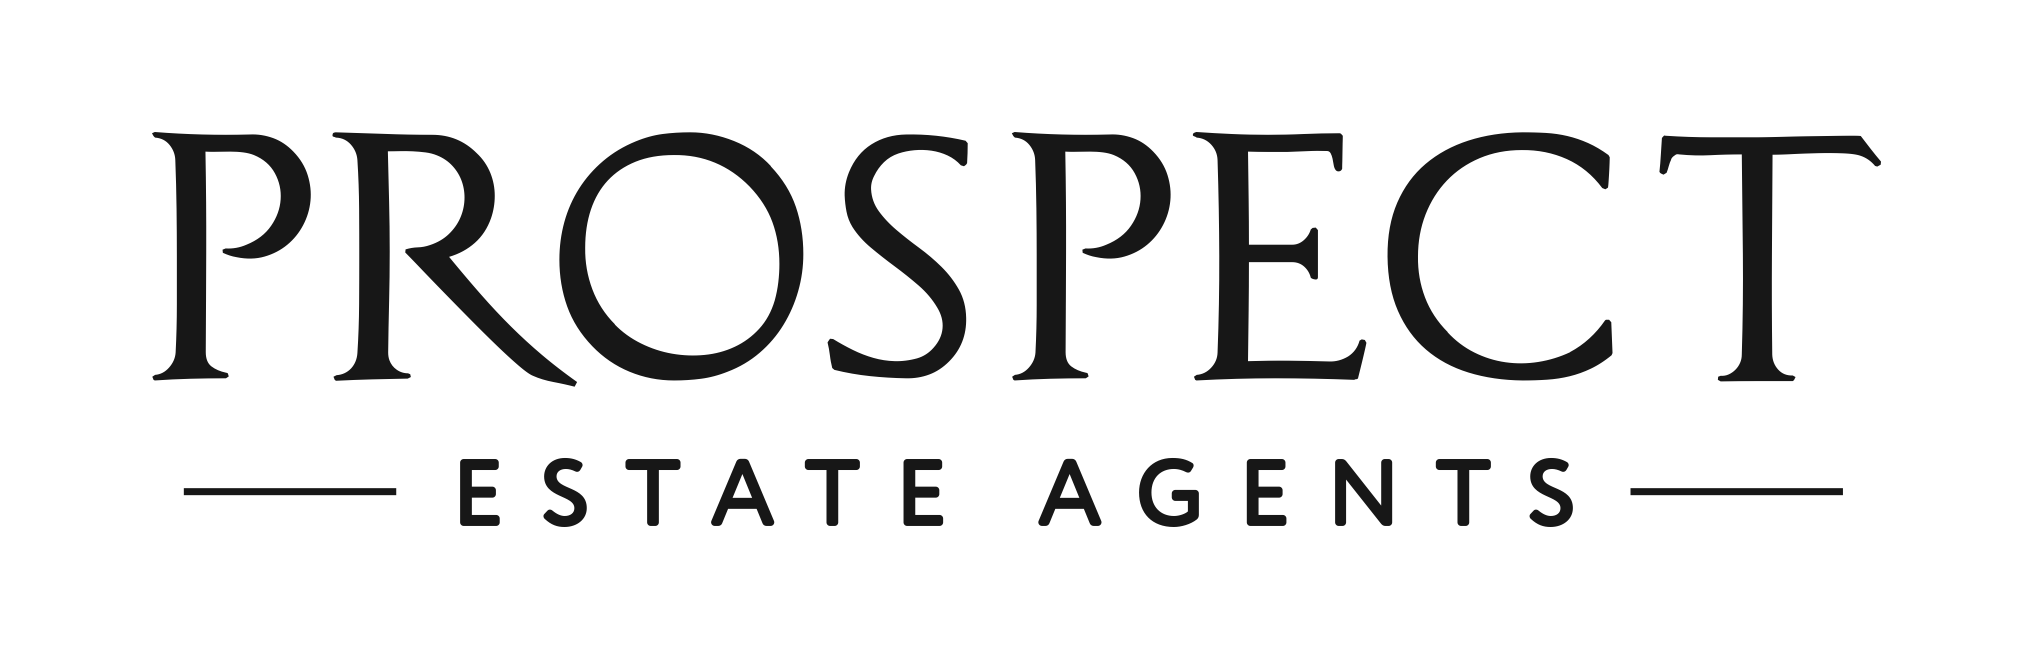 Prospect Estate Agents - ABBOTSFORD - Real Estate Agency